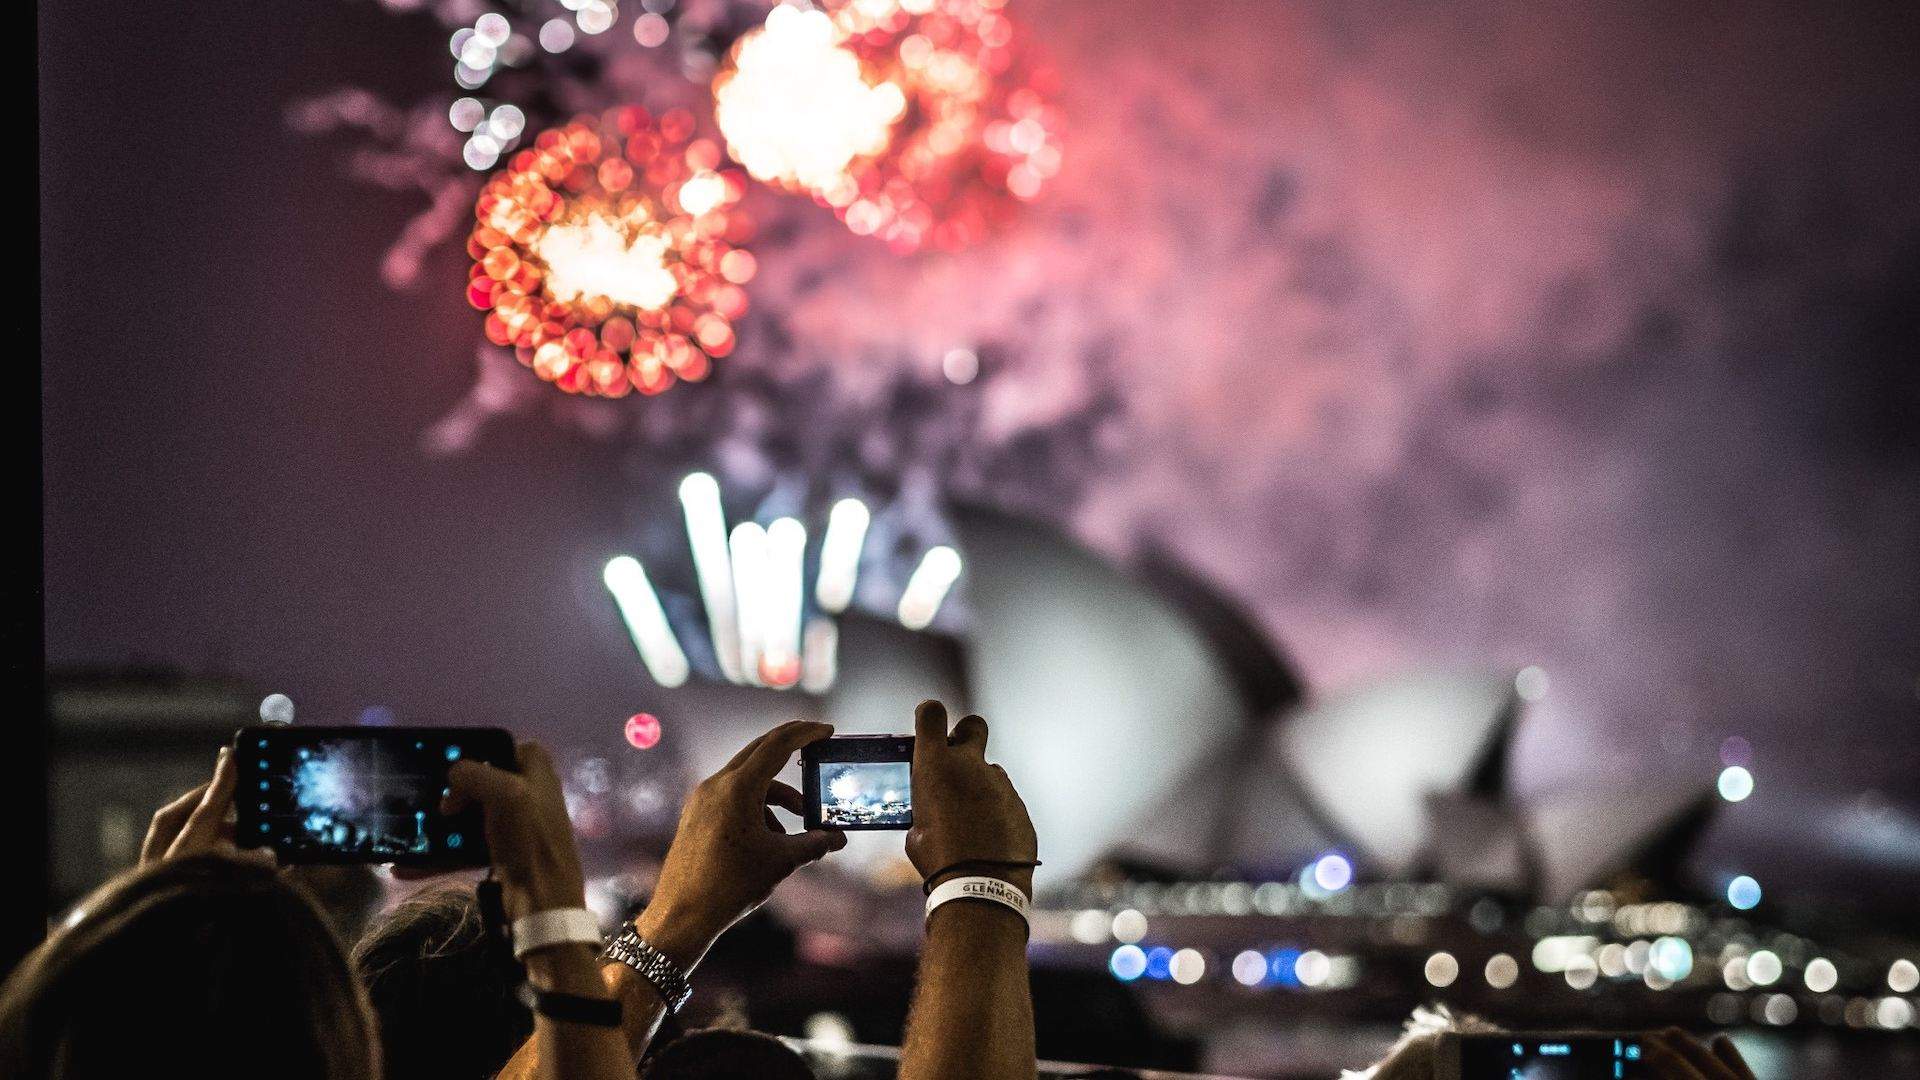 We're Giving Away Tickets to a Massive New Year's Eve Party for You and Three Mates